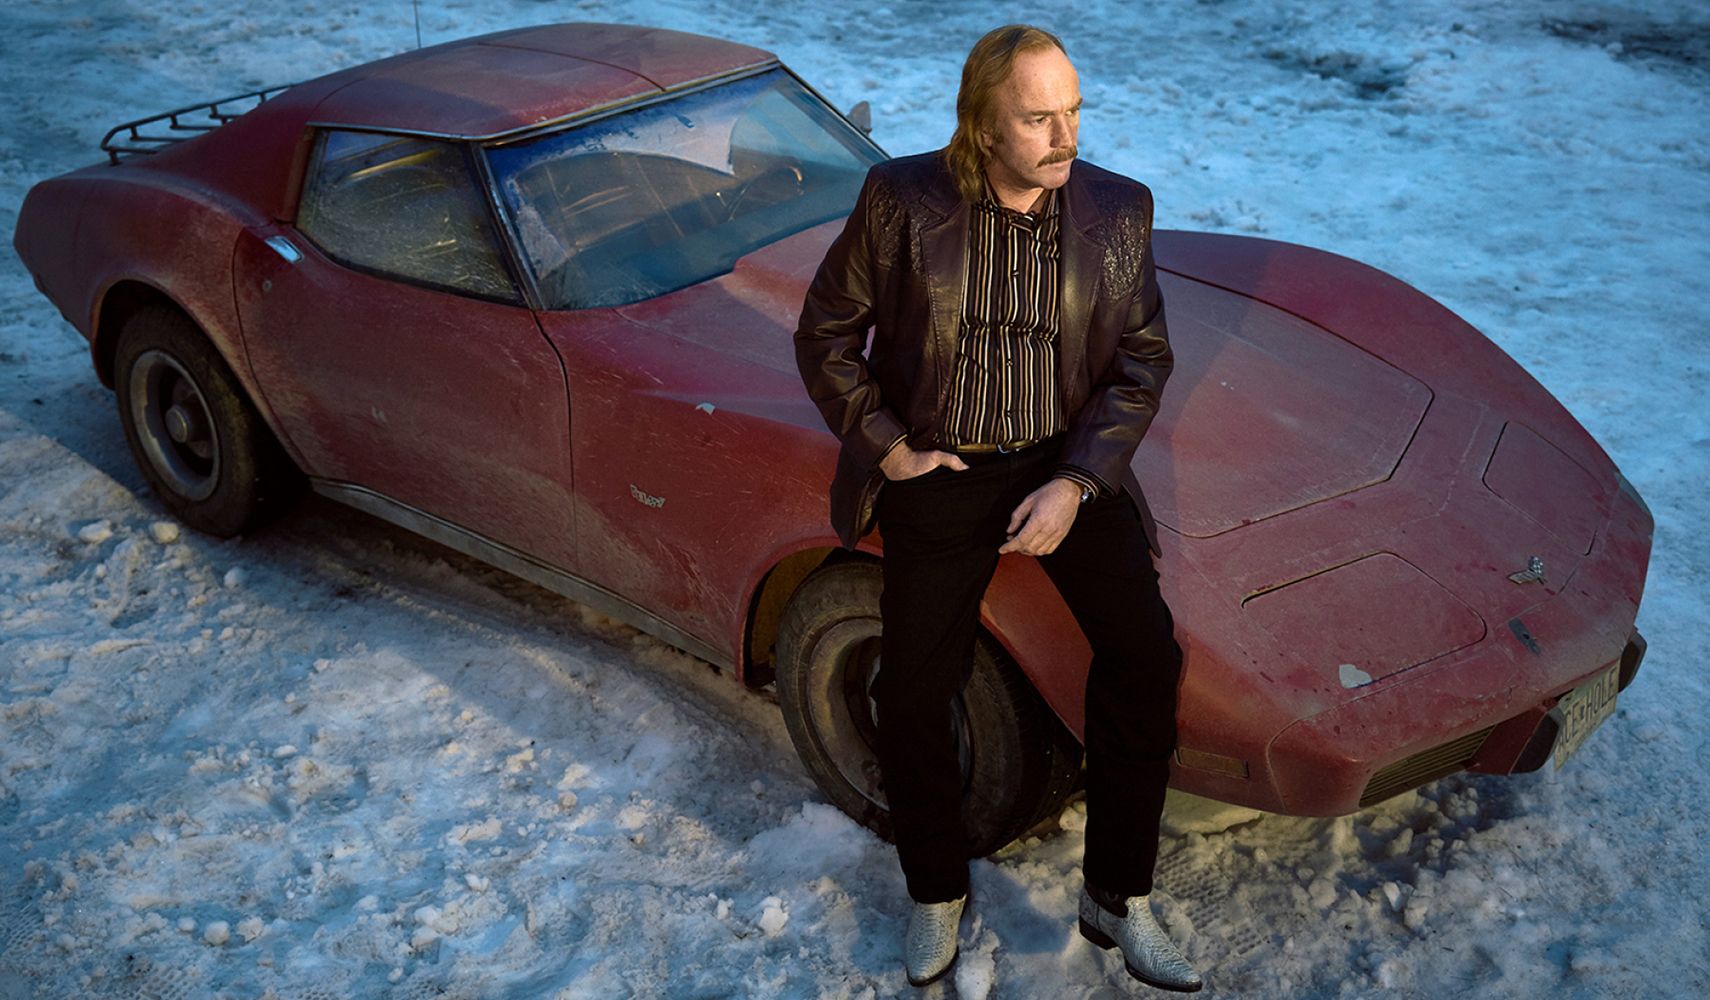 Fargo's Ewan McGregor Sitting On This 1977 Cherry Red Chevy Corvette Was A Sight To Behold